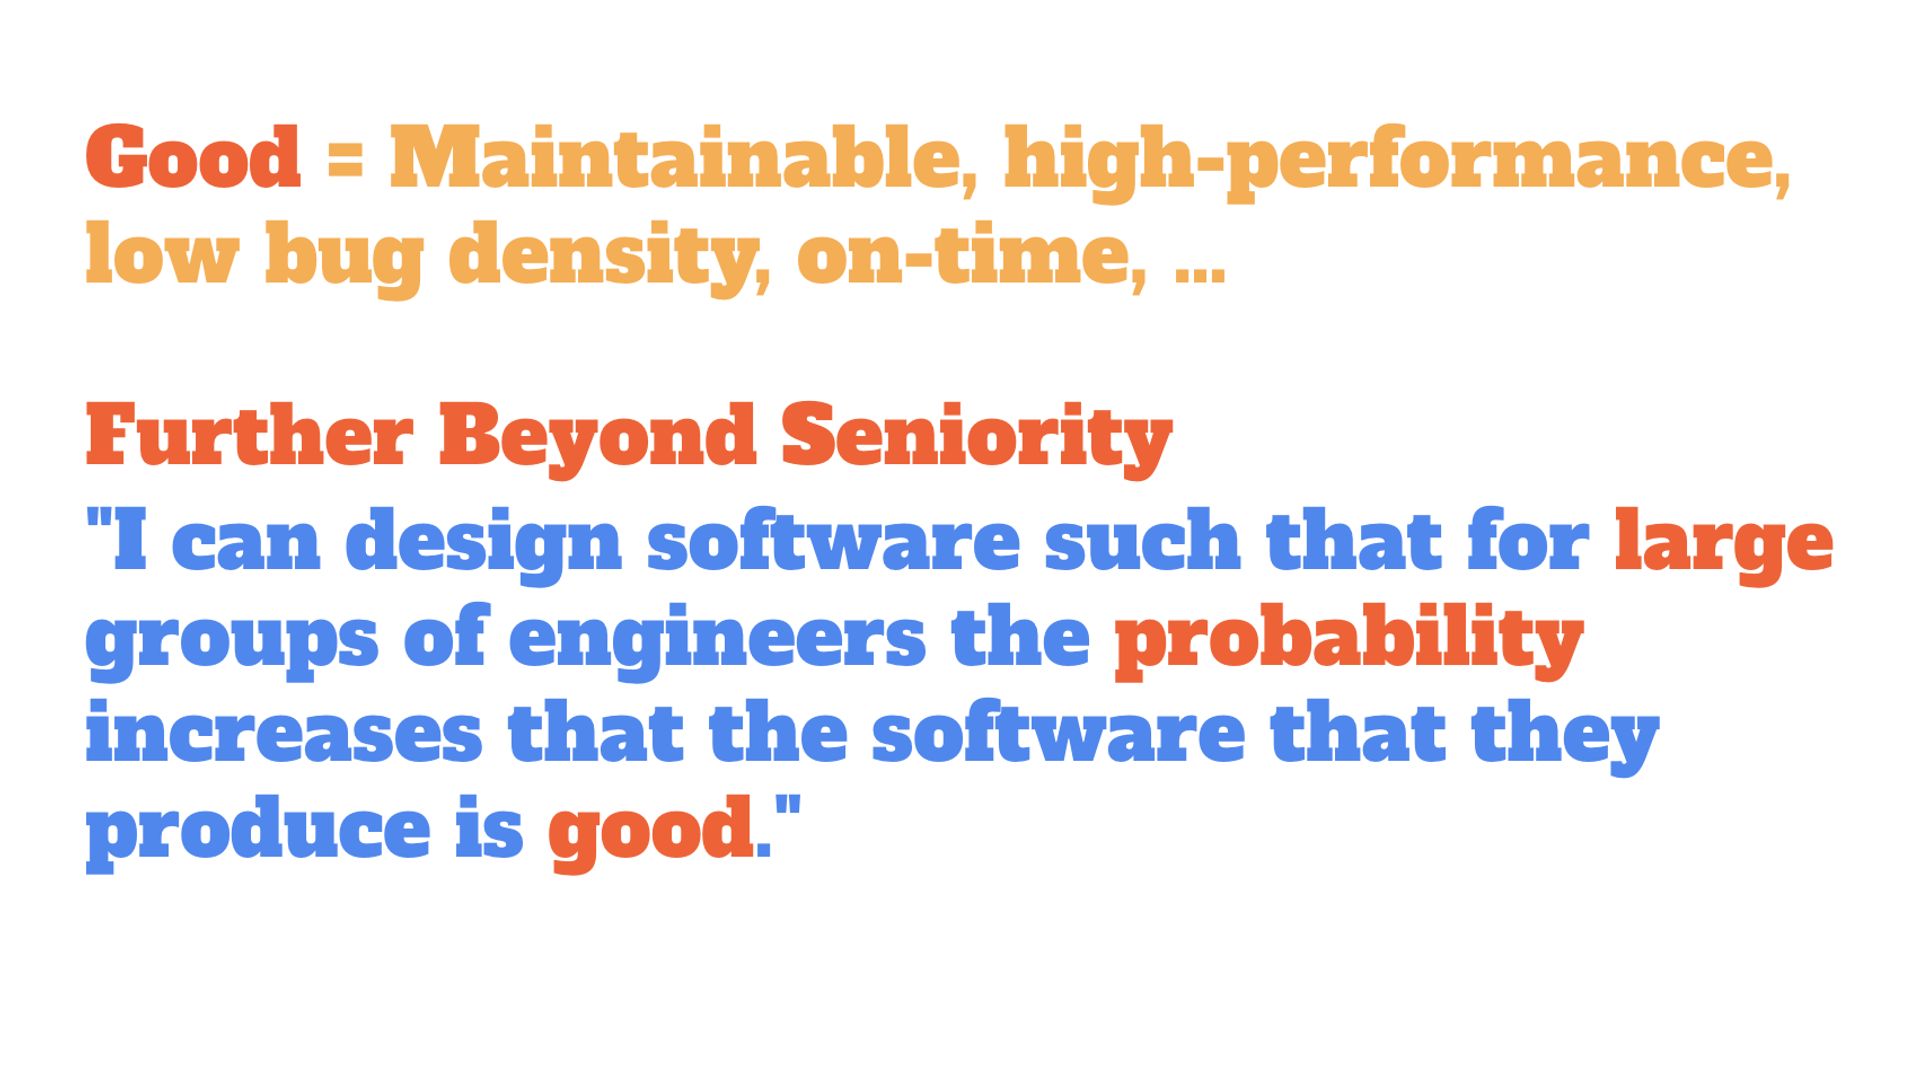 Good = Maintainable, high-performance, low bug density, on-time, …. Further Beyond Seniority: "I can design software such that for large groups of engineers the probability increases that the software that they produce is good."